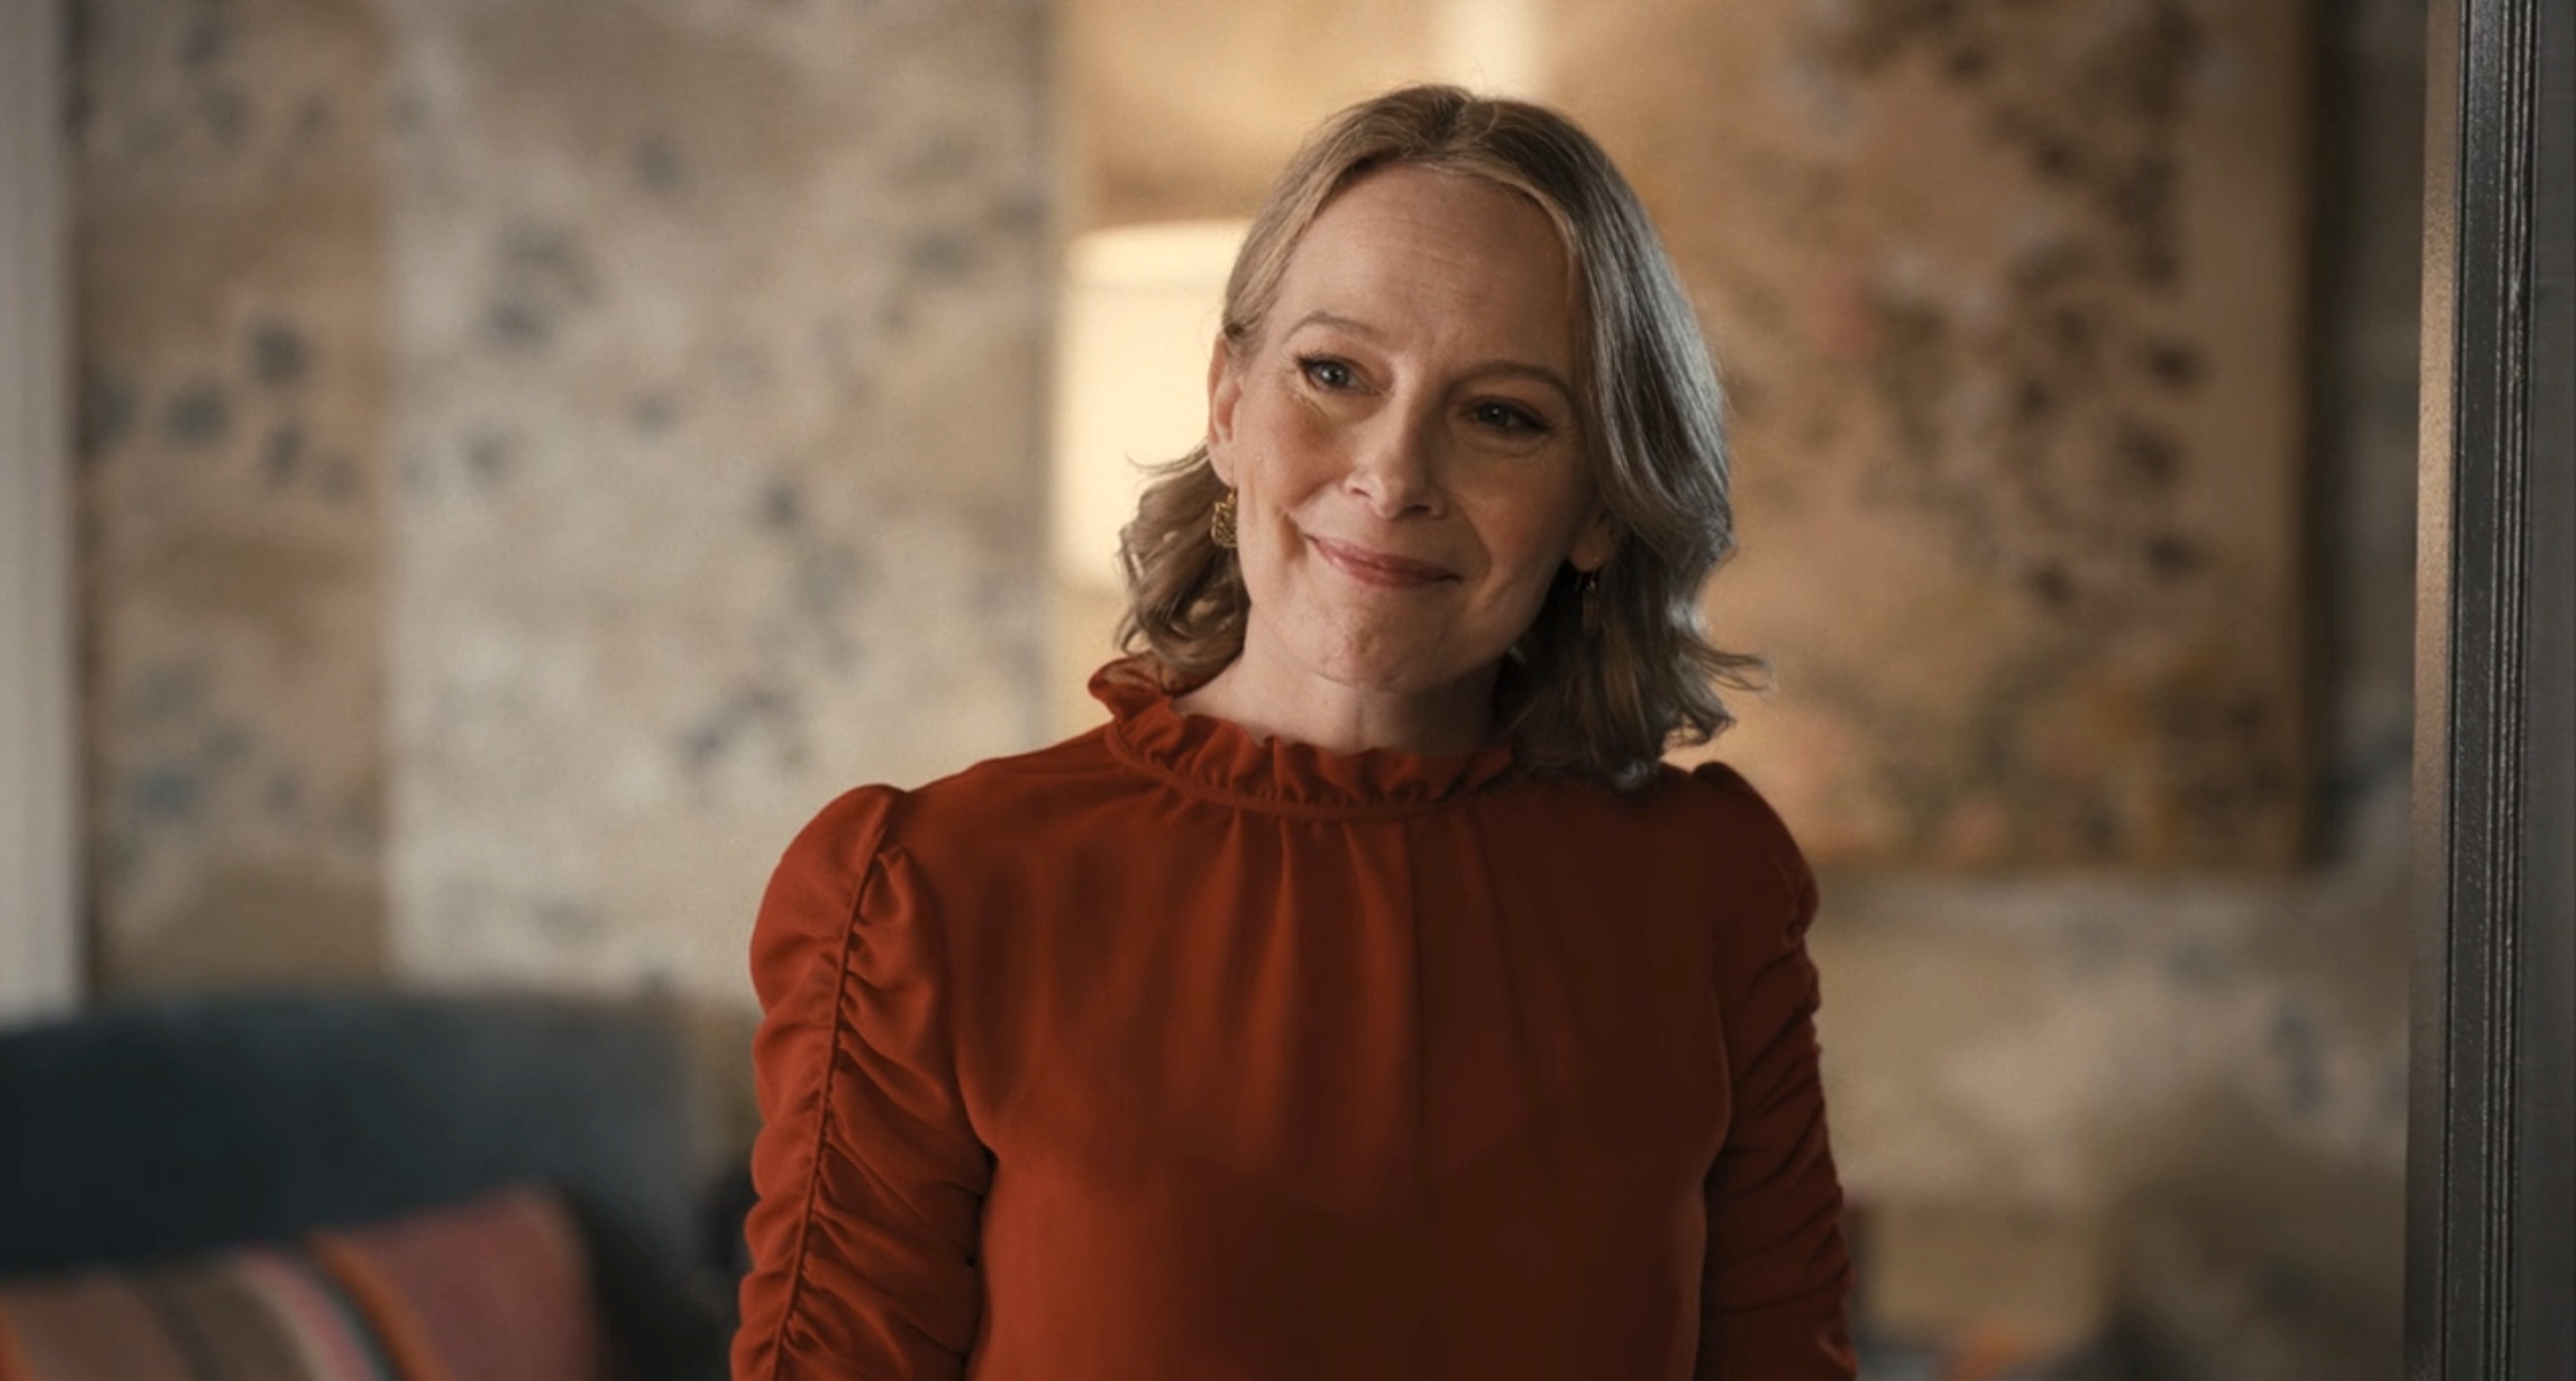 Only Murders in the Building Cast - Amy Ryan as Jan